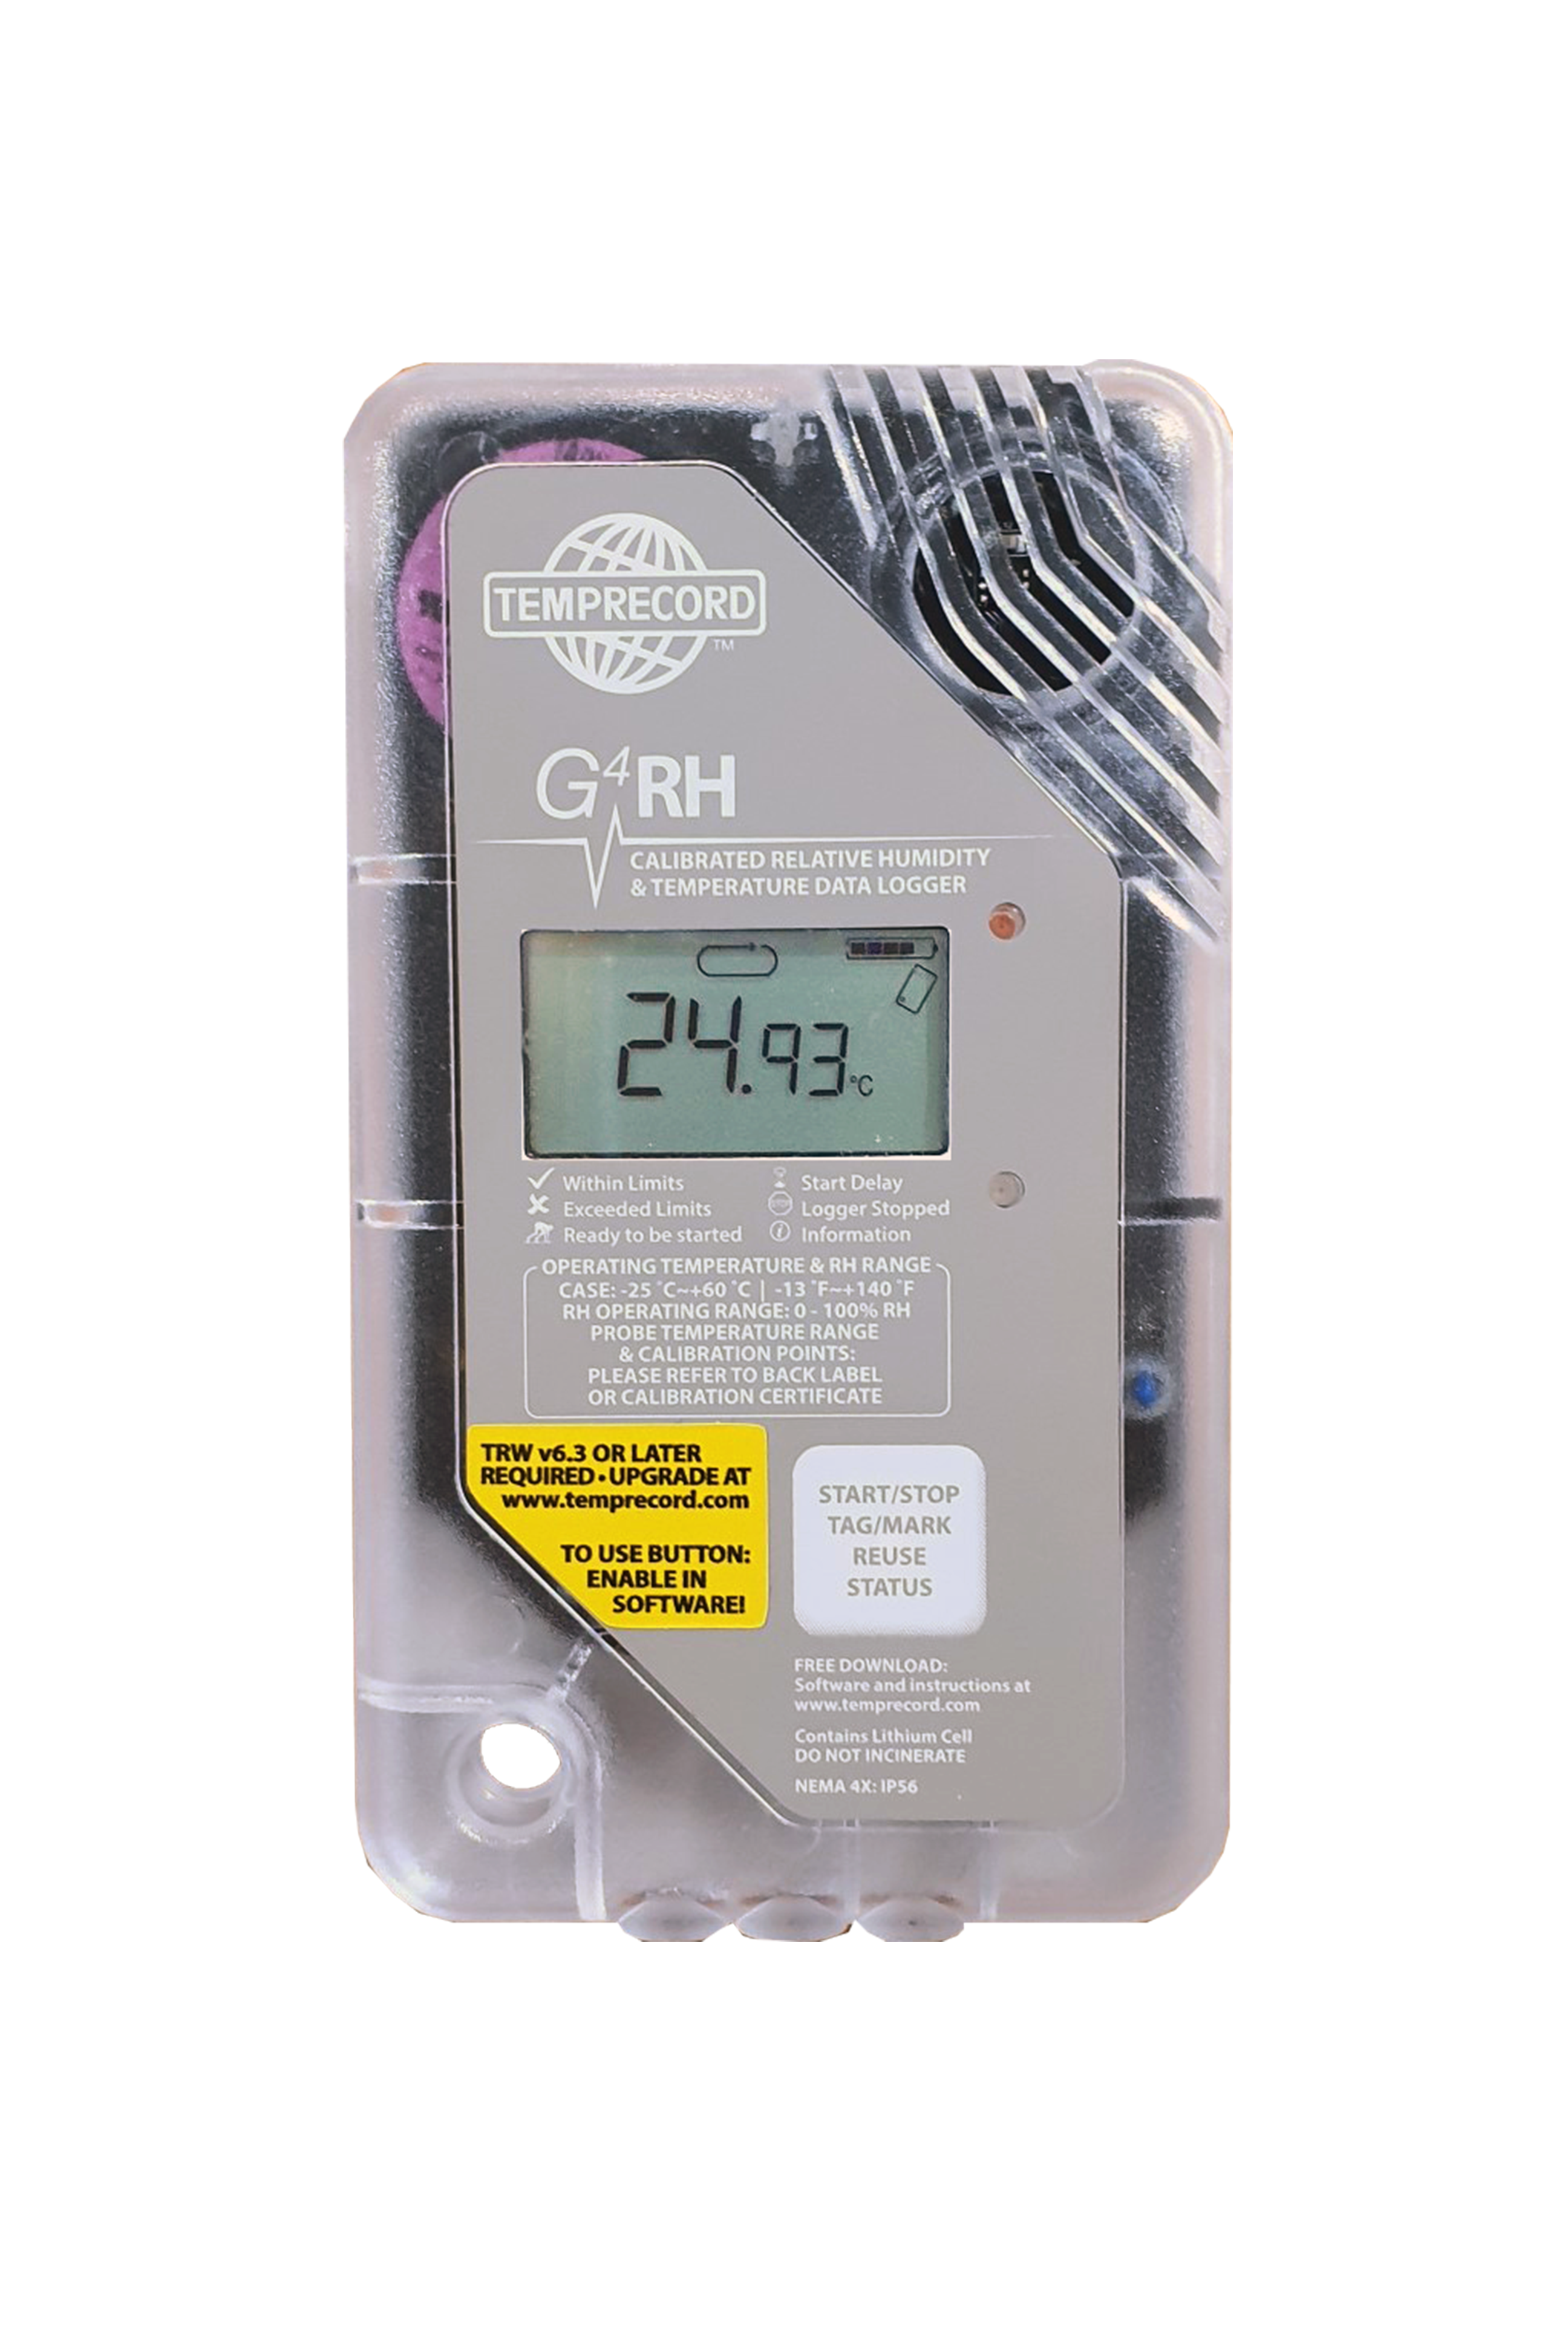 G4 RH (Relative humidity) and temperature data logger